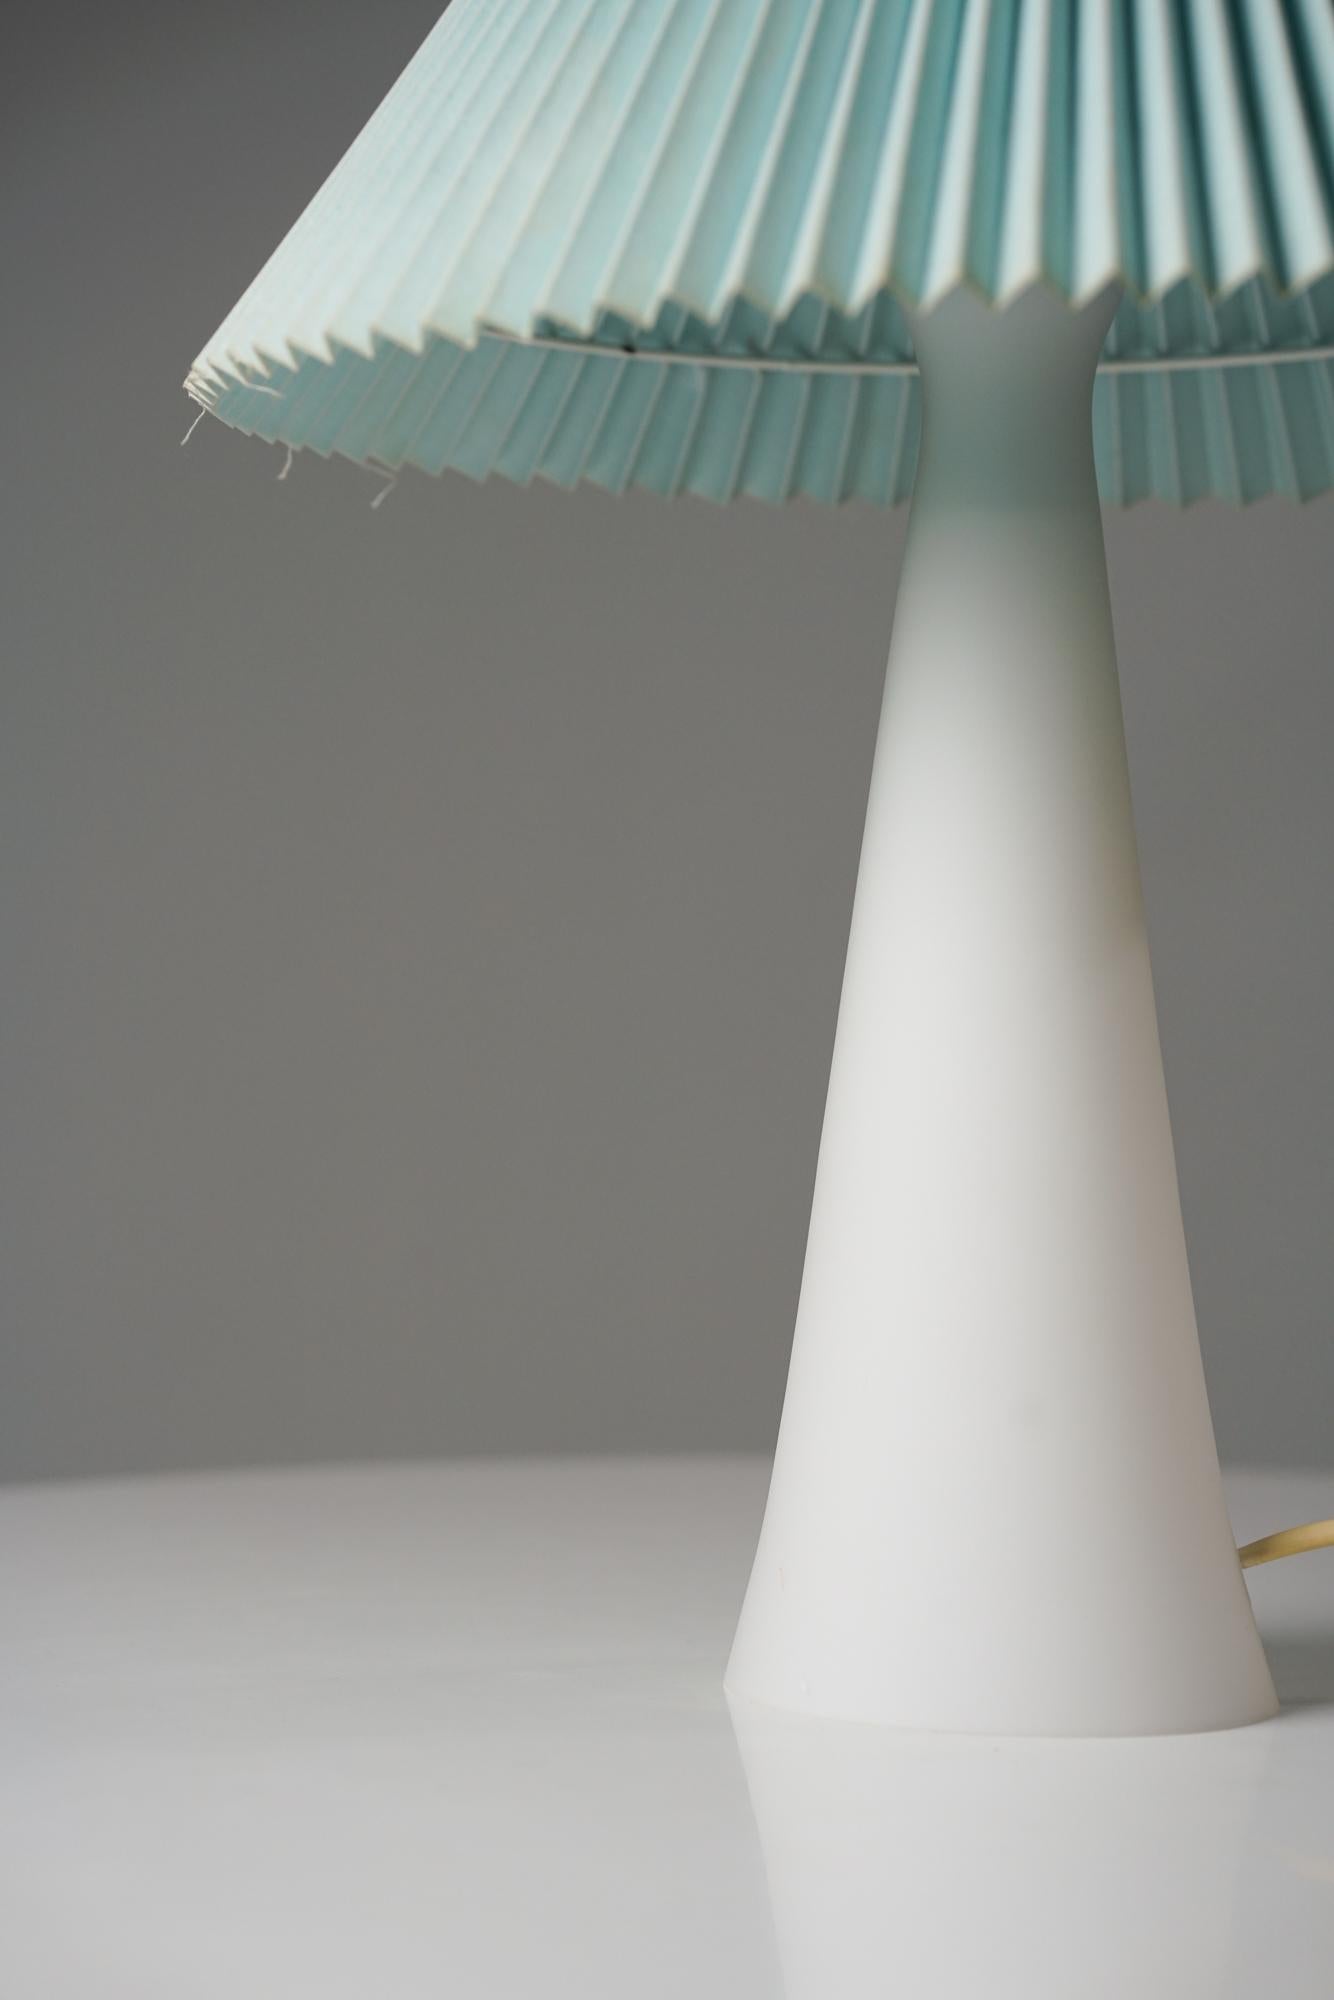 Mid-20th Century Glass Table Lamp, Lisa Johansson-Pape, Orno Oy, 1950s  For Sale